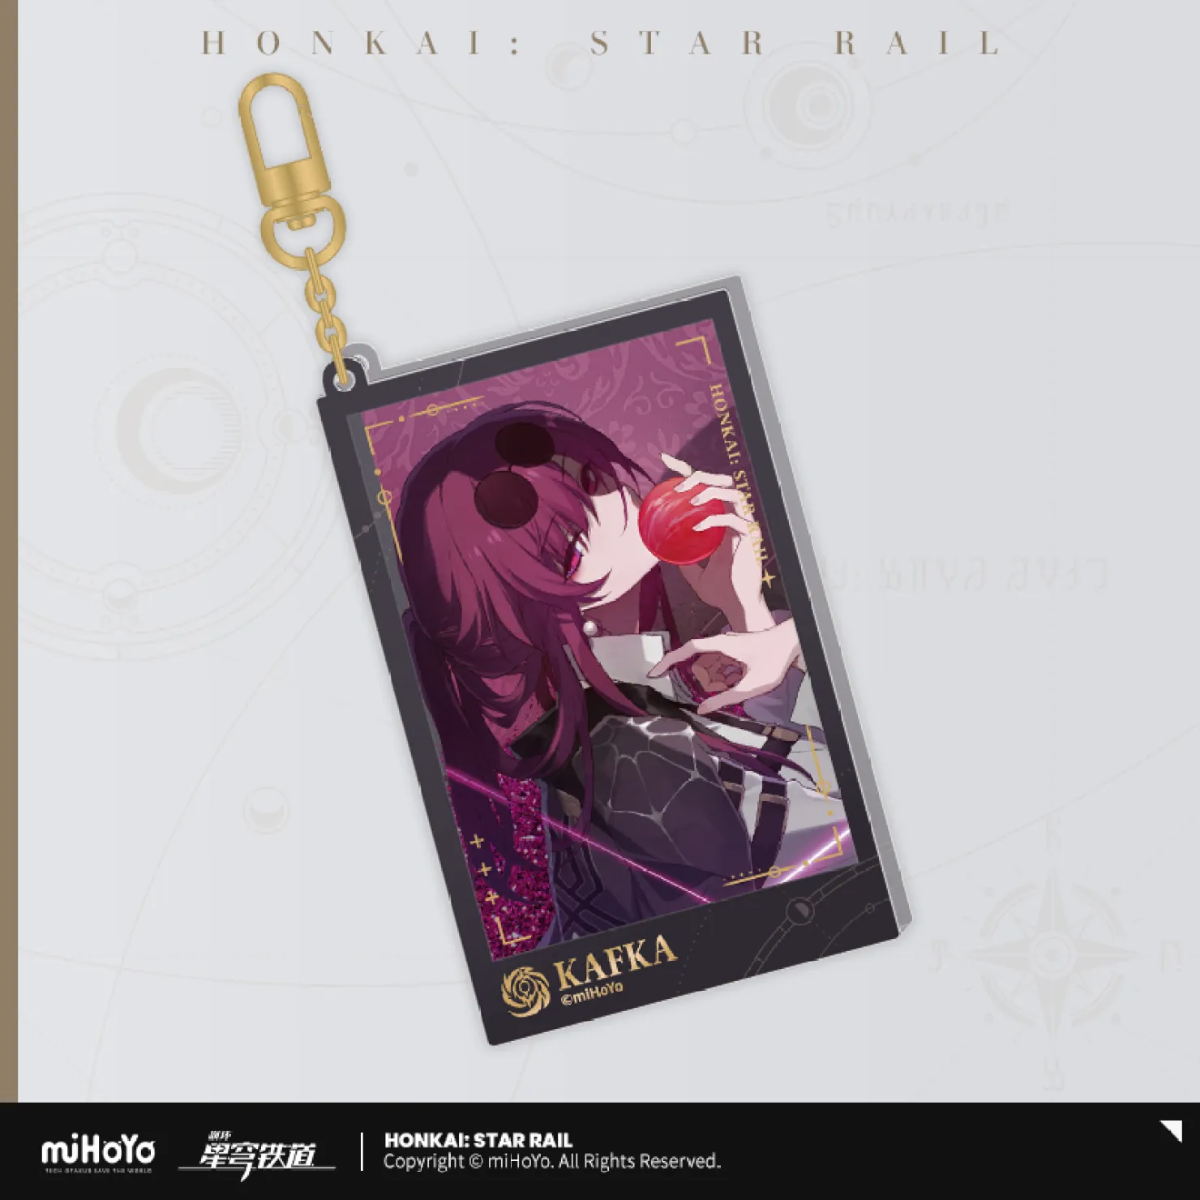 Honkai: Star Rail Quicksand Keychain &quot;Departure Countdown Series&quot;-Kafka-miHoYo-Ace Cards &amp; Collectibles